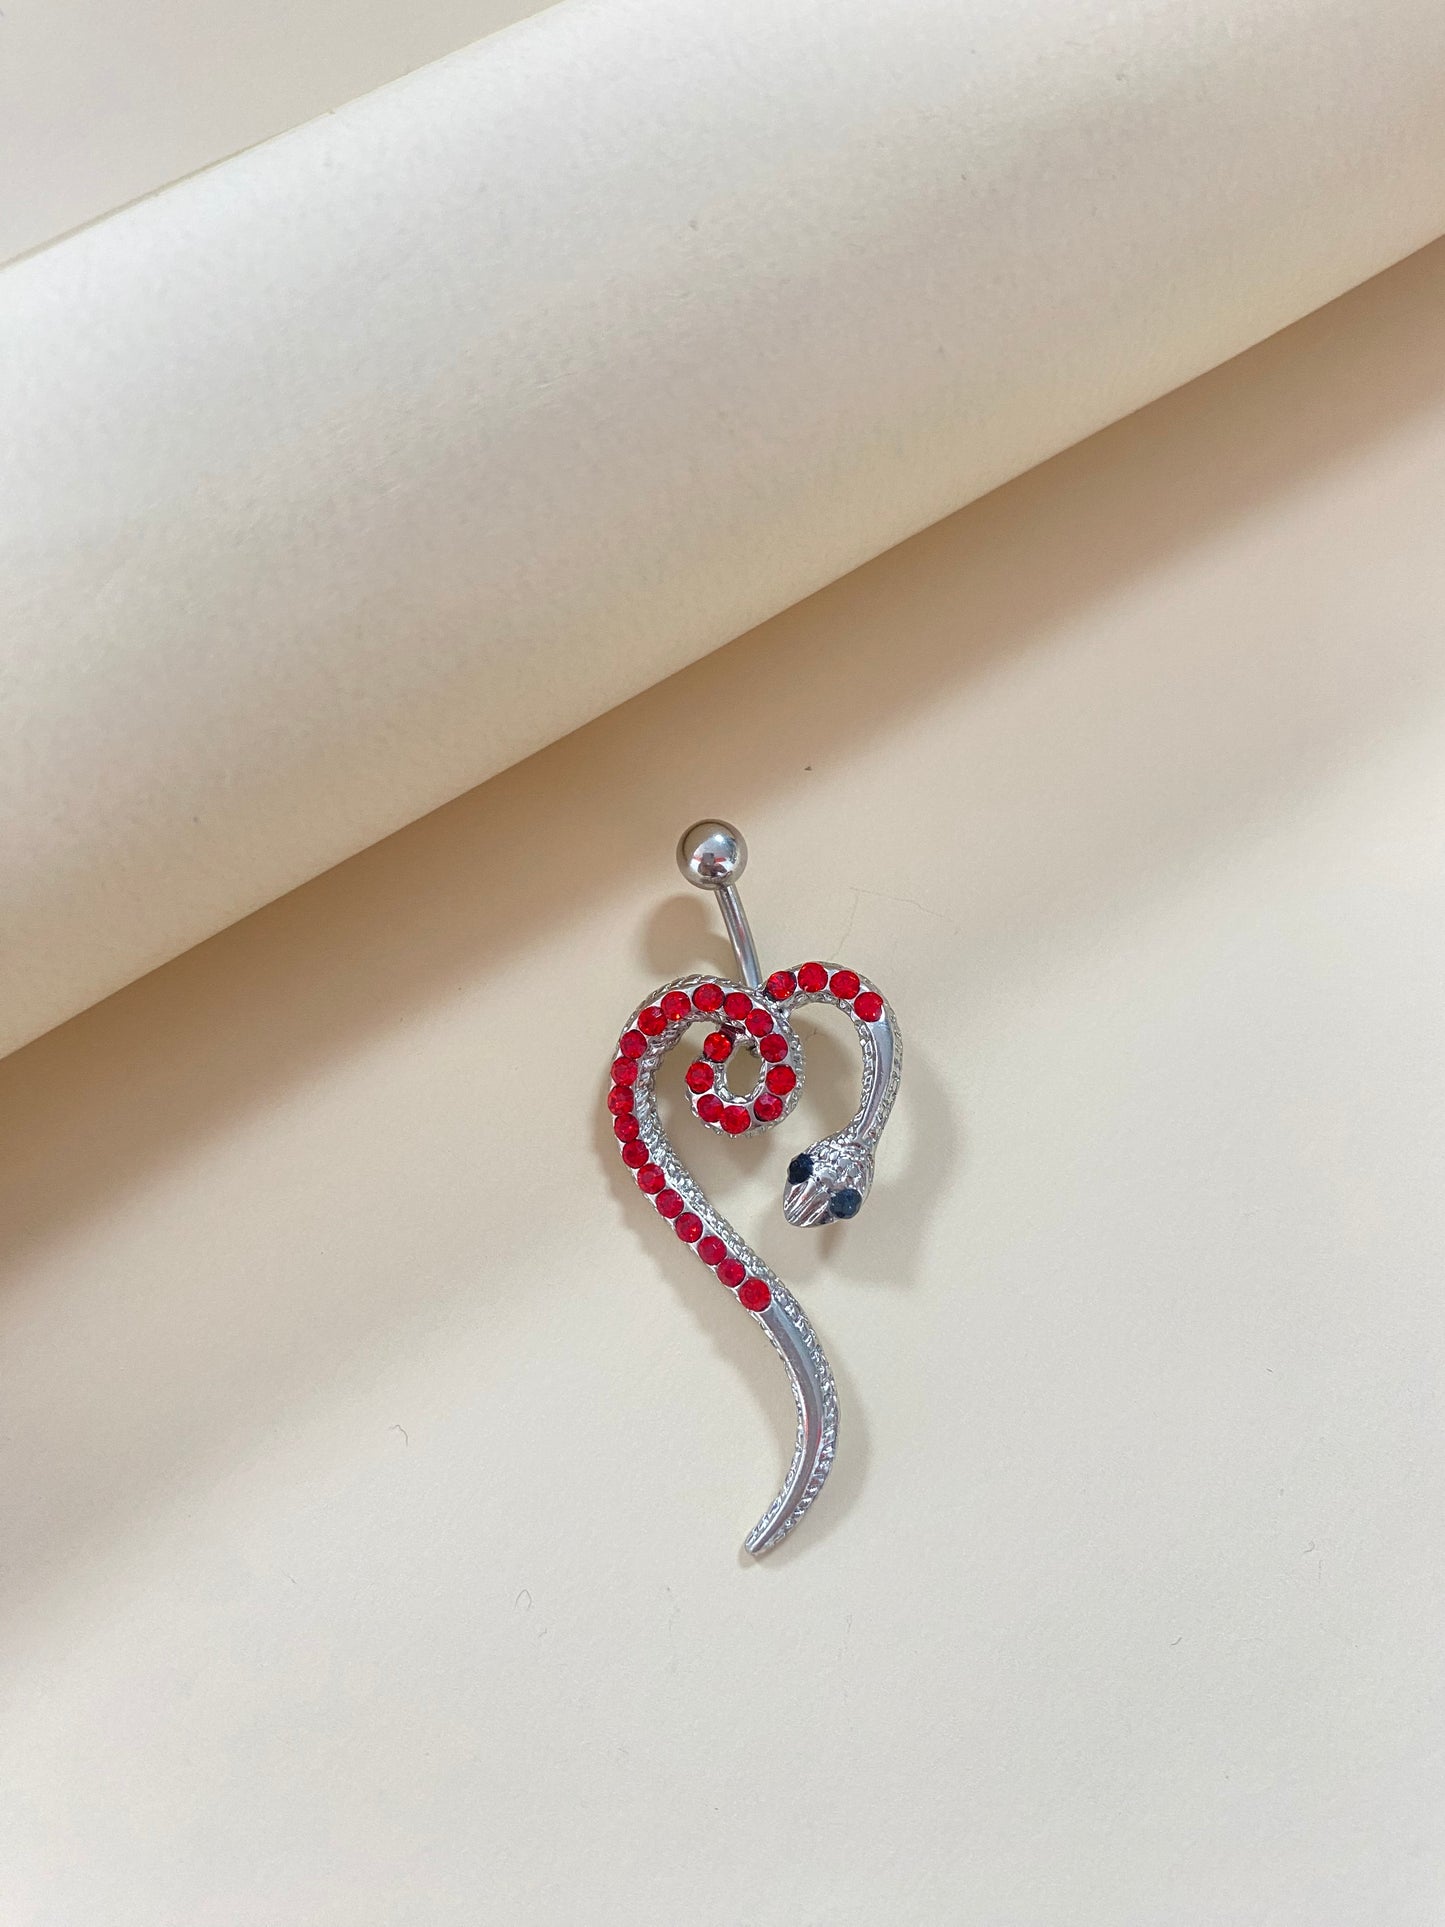 Gaibei Europe And America Cross Border Simulated Snakes Belly Ring Irregular Heart-shaped Zircon Navel Stud Piercing Jewelry